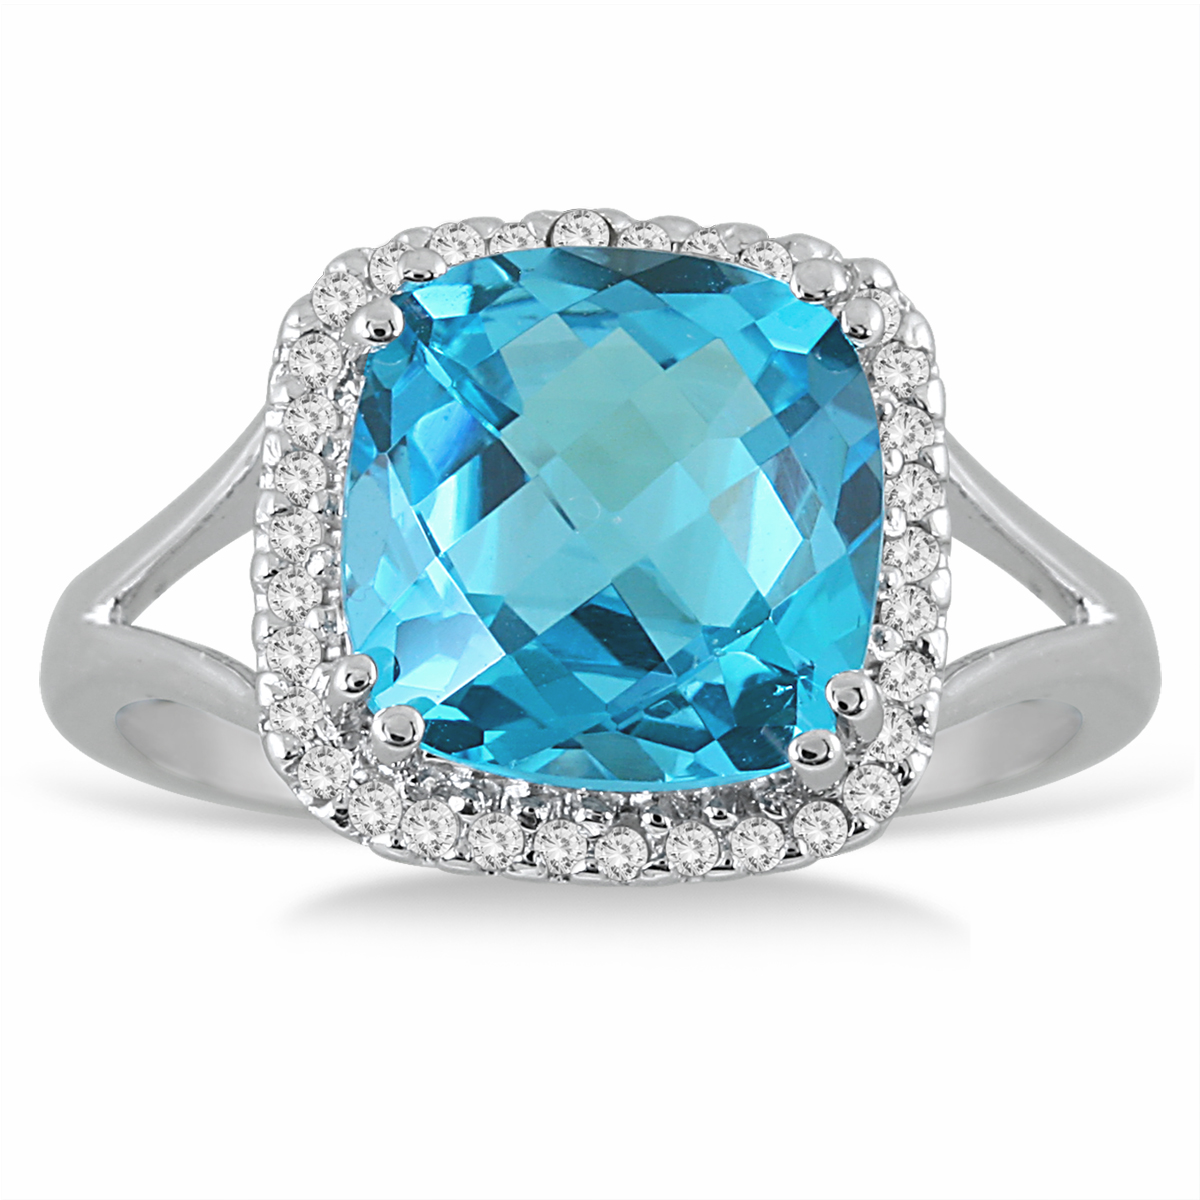 Cushion Cut Blue Topaz and Diamond Ring in 14K White Gold